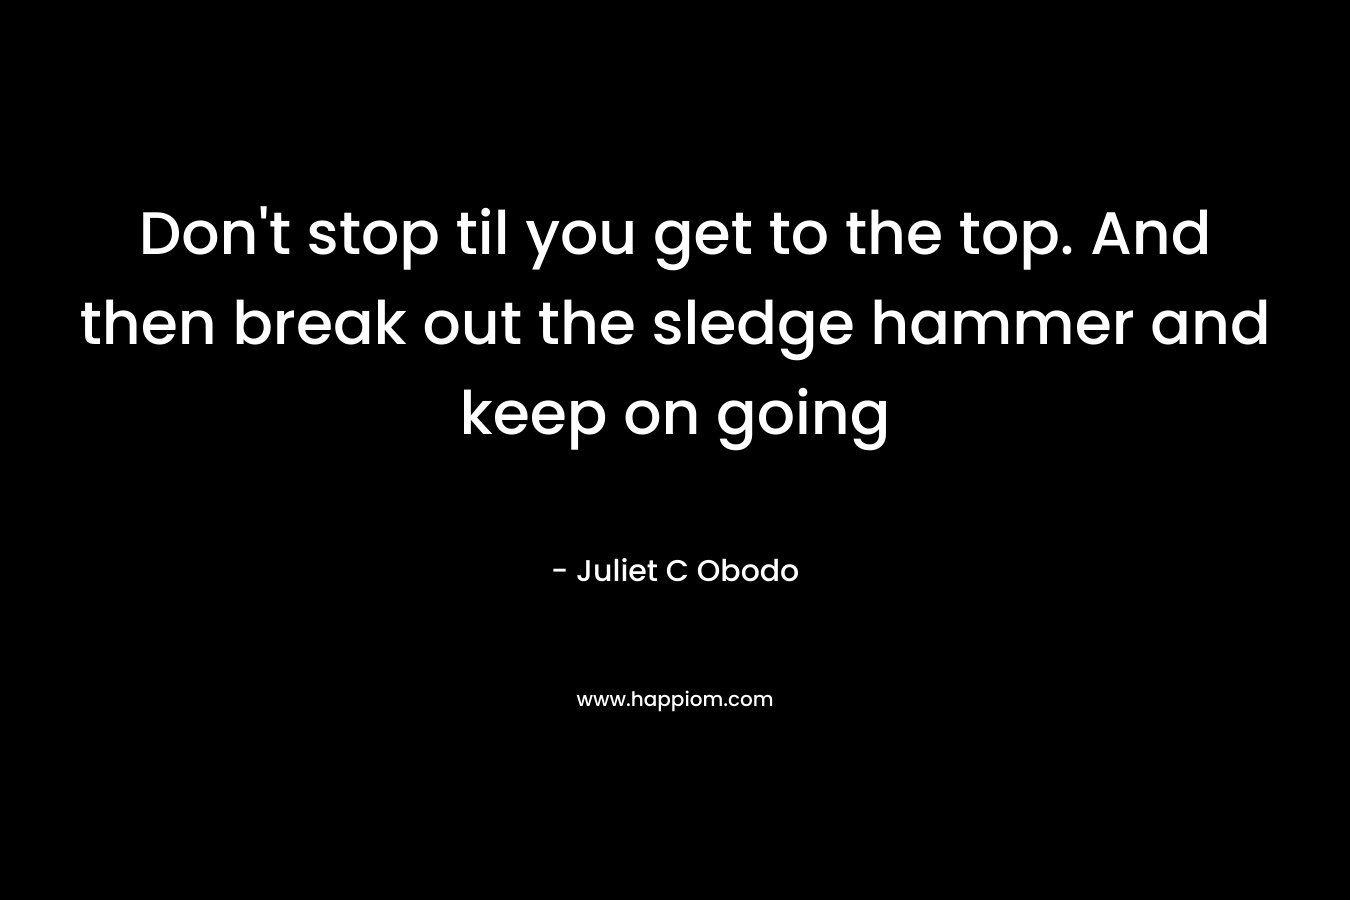 Don't stop til you get to the top. And then break out the sledge hammer and keep on going